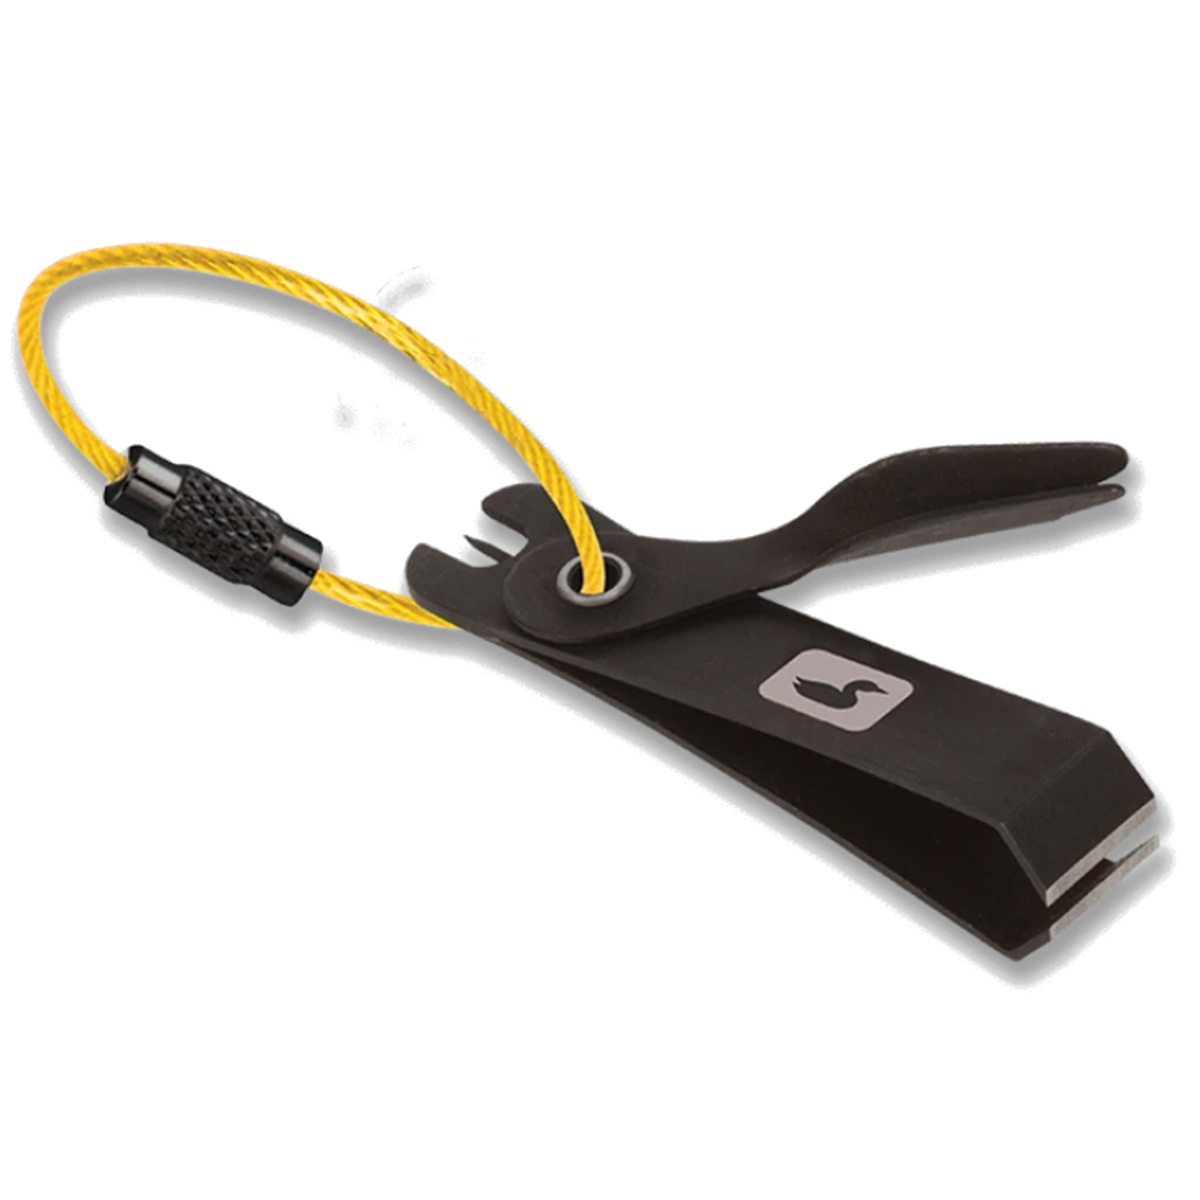 Loon Rogue Nippers W/ Knot Tool